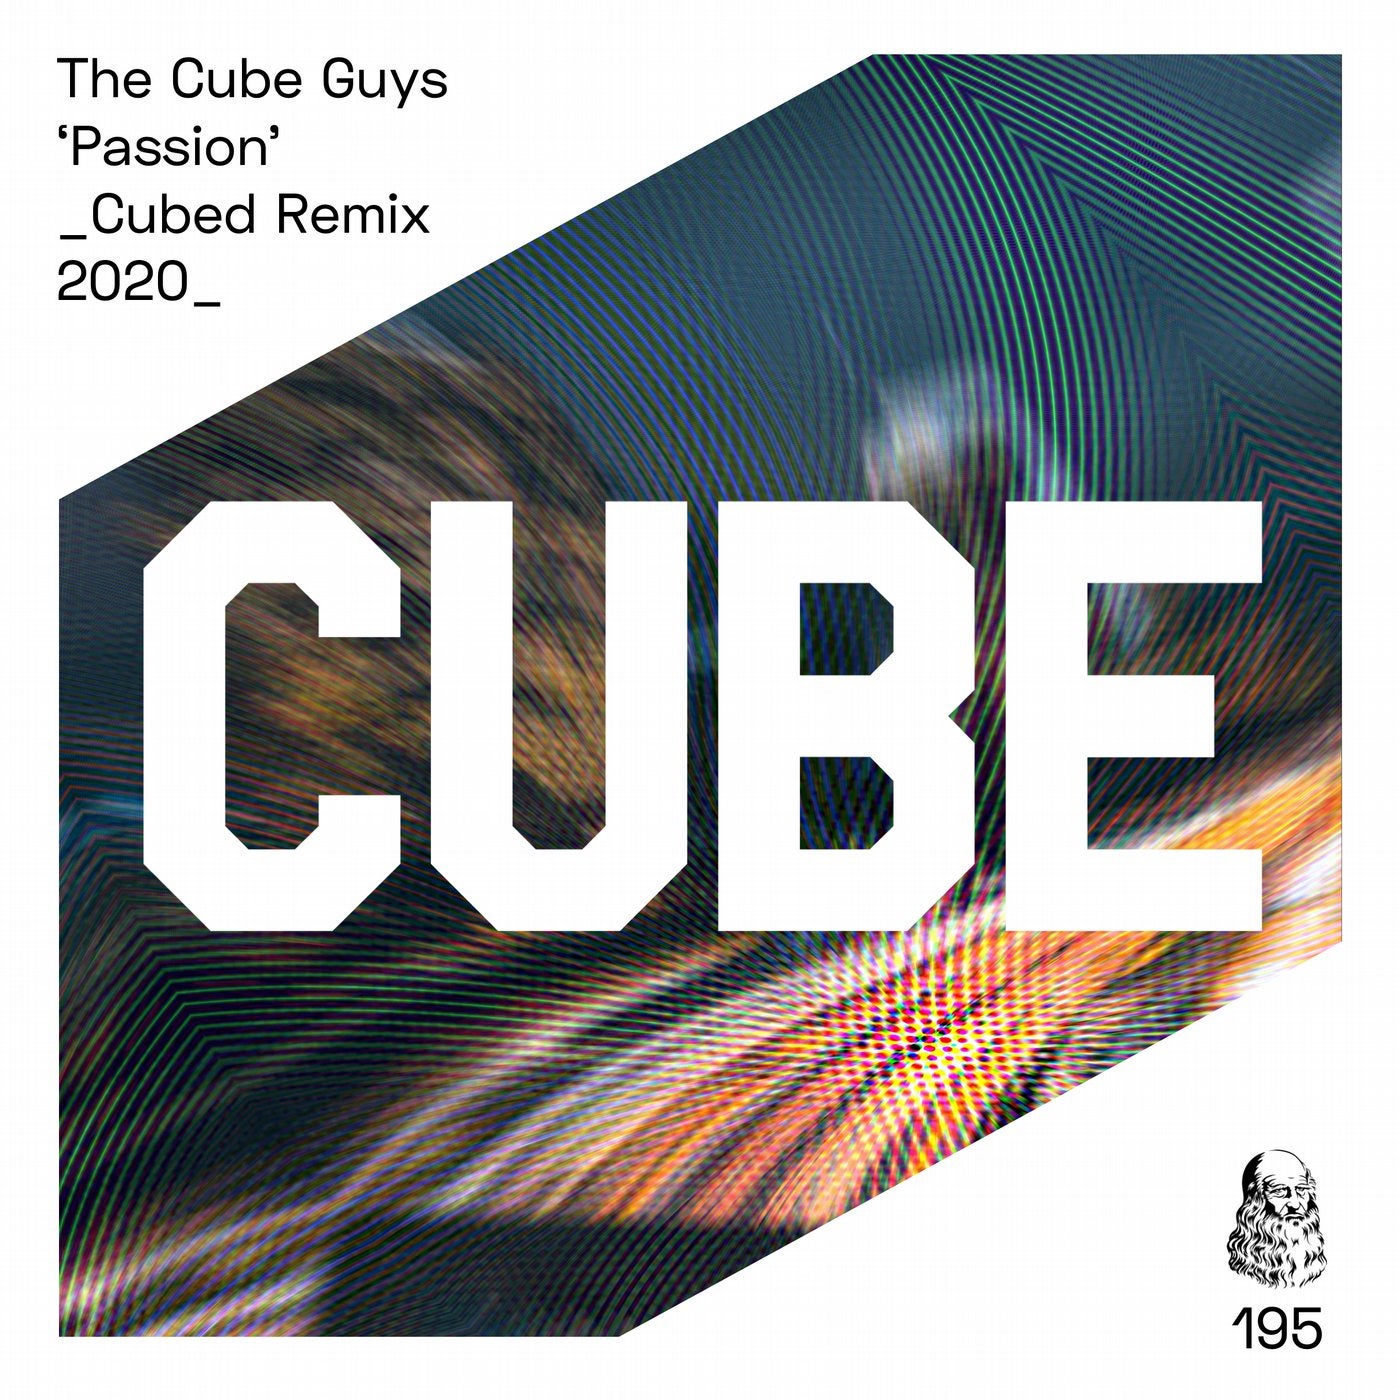 Cube remix. The Cube guys. Cube records.